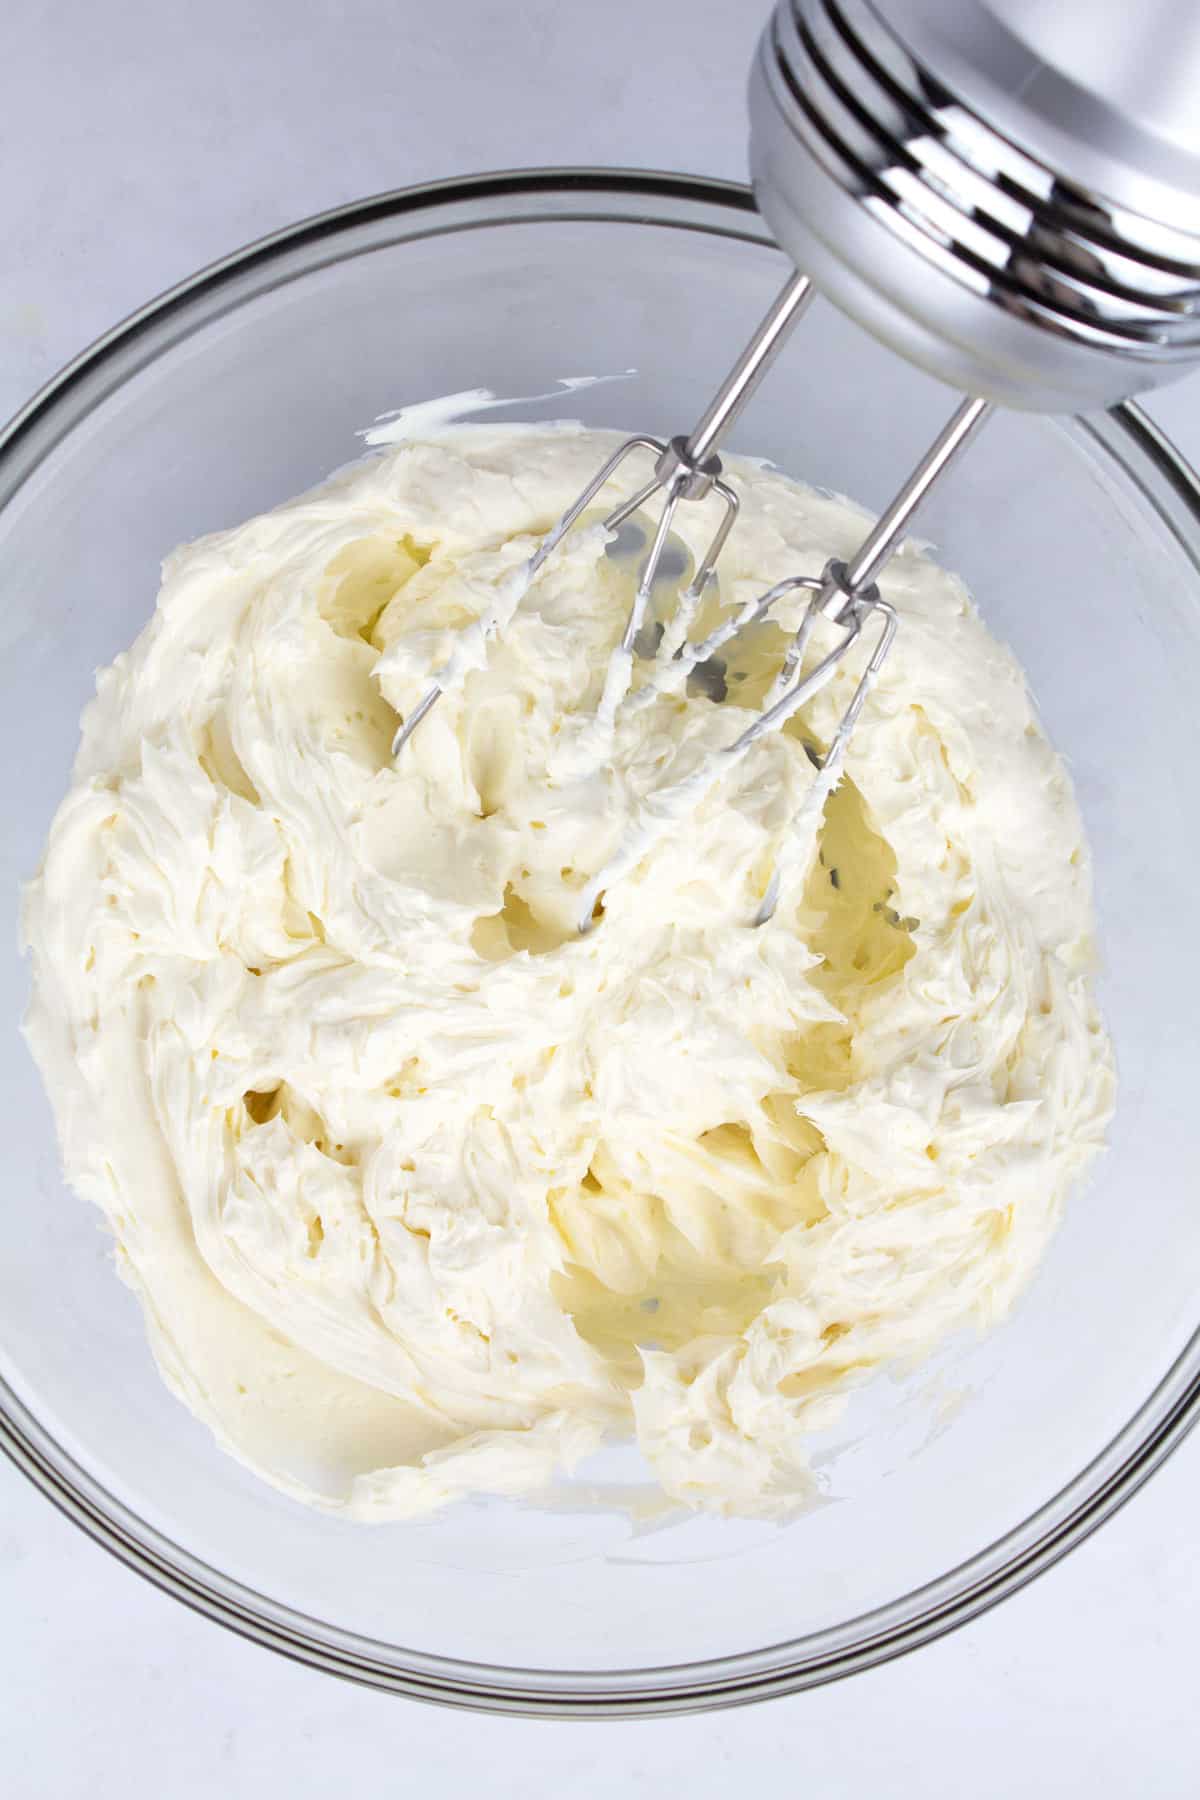 An overhead view of beaten cream cheese in a clear glass bowl with a hand mixer.